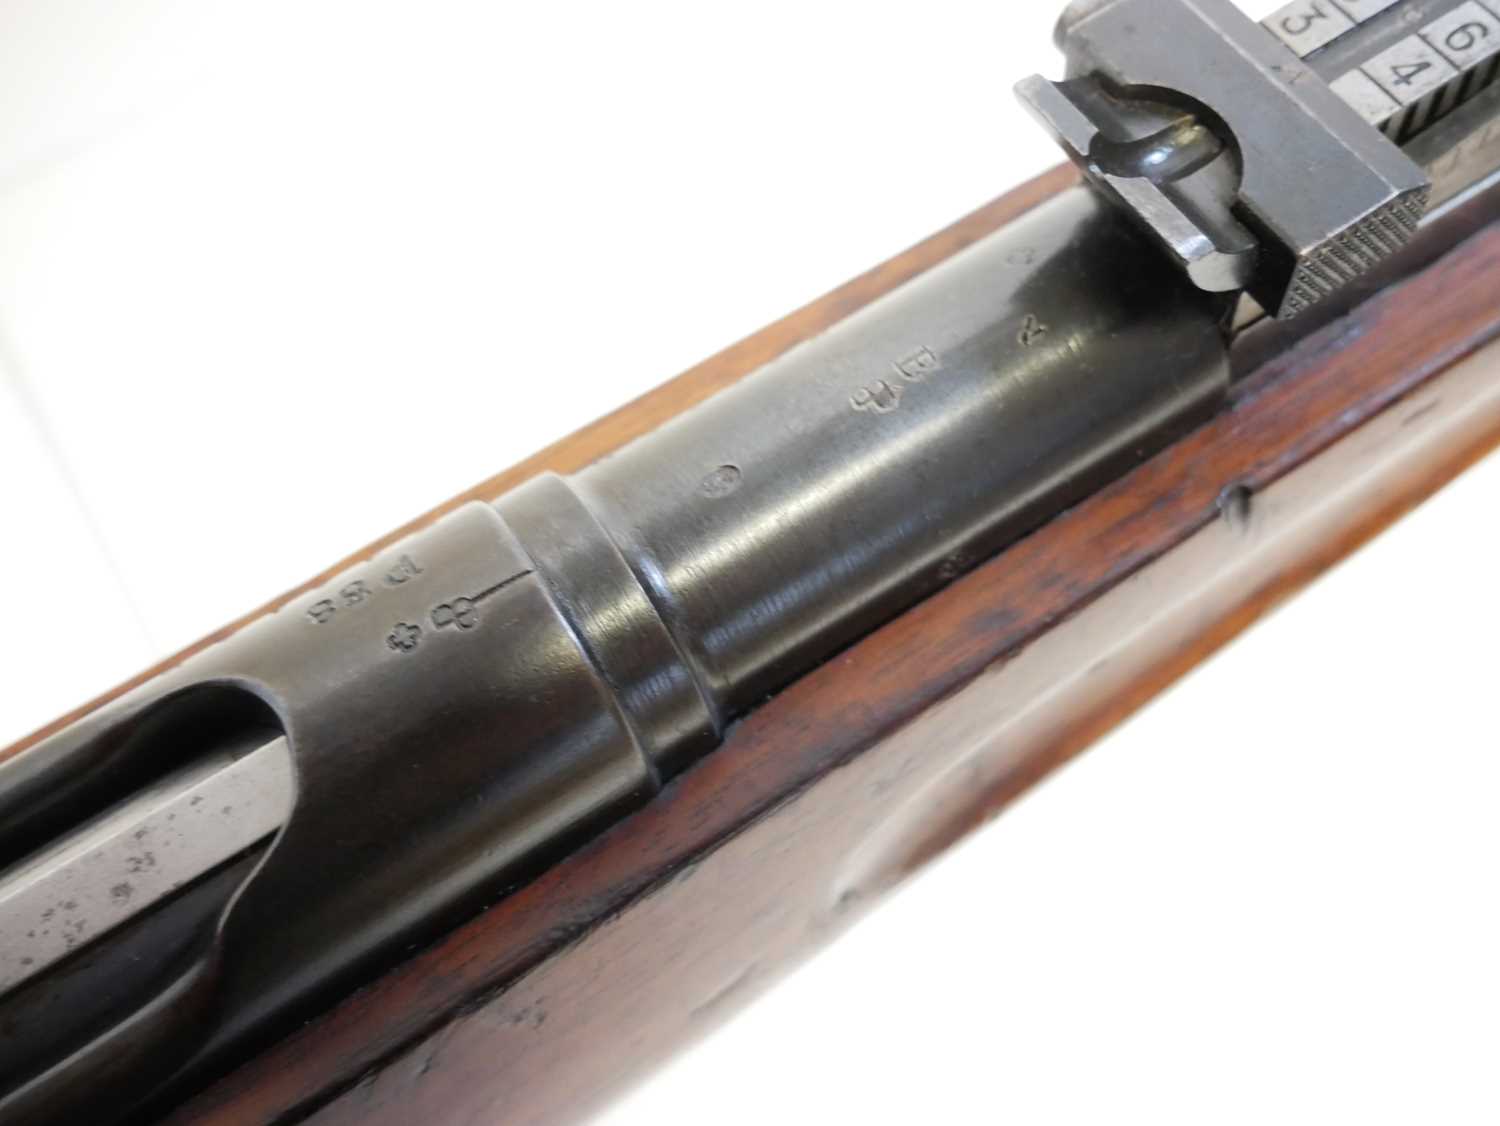 Schmidt Rubin 1896/ 1911 7.5mm straight pull rifle, matching serial numbers 314149 to barrel, - Image 6 of 20